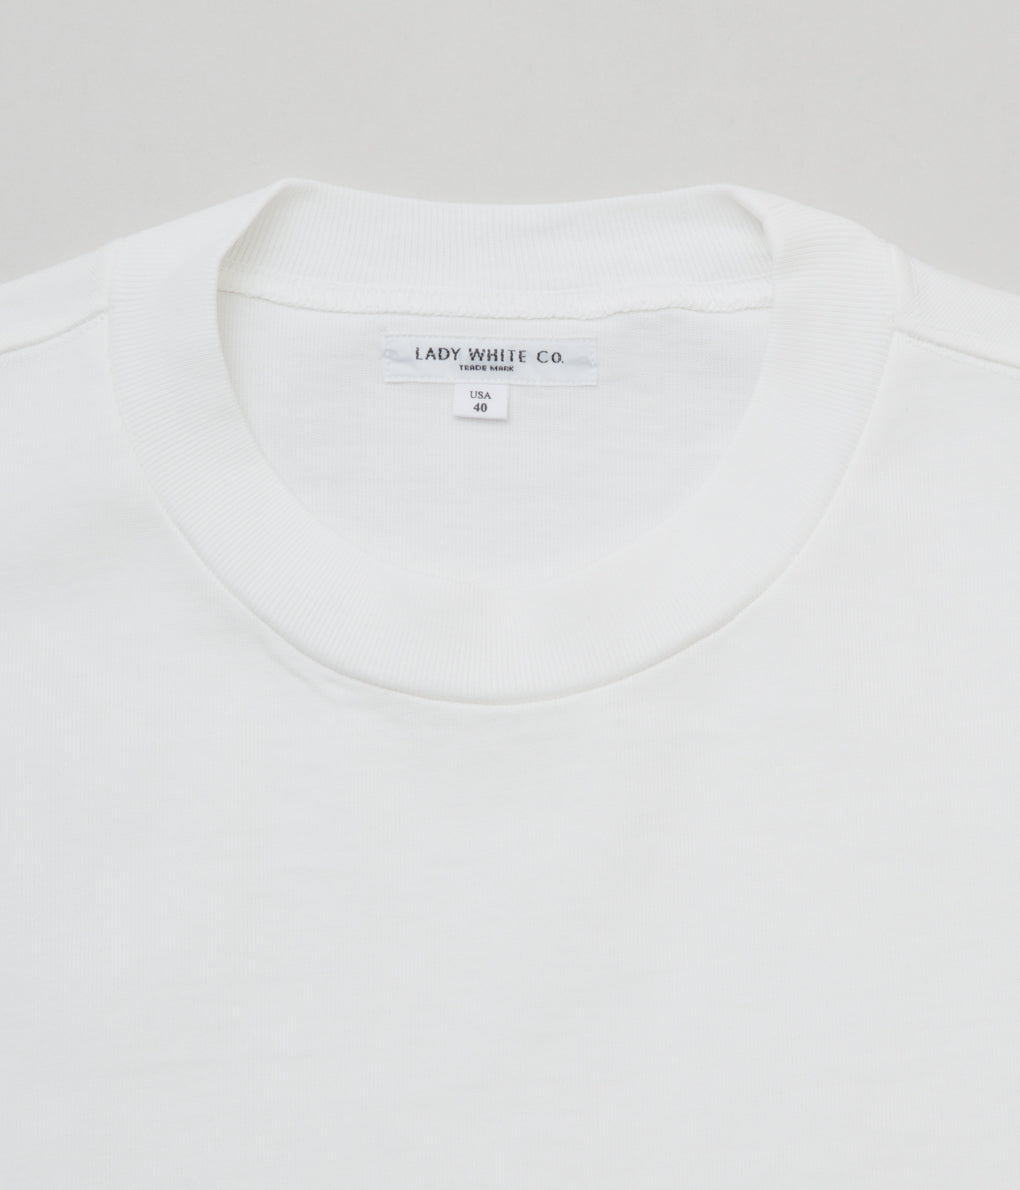 LADY WHITE CO. " RUGBY T-SHIRT"(WHITE)